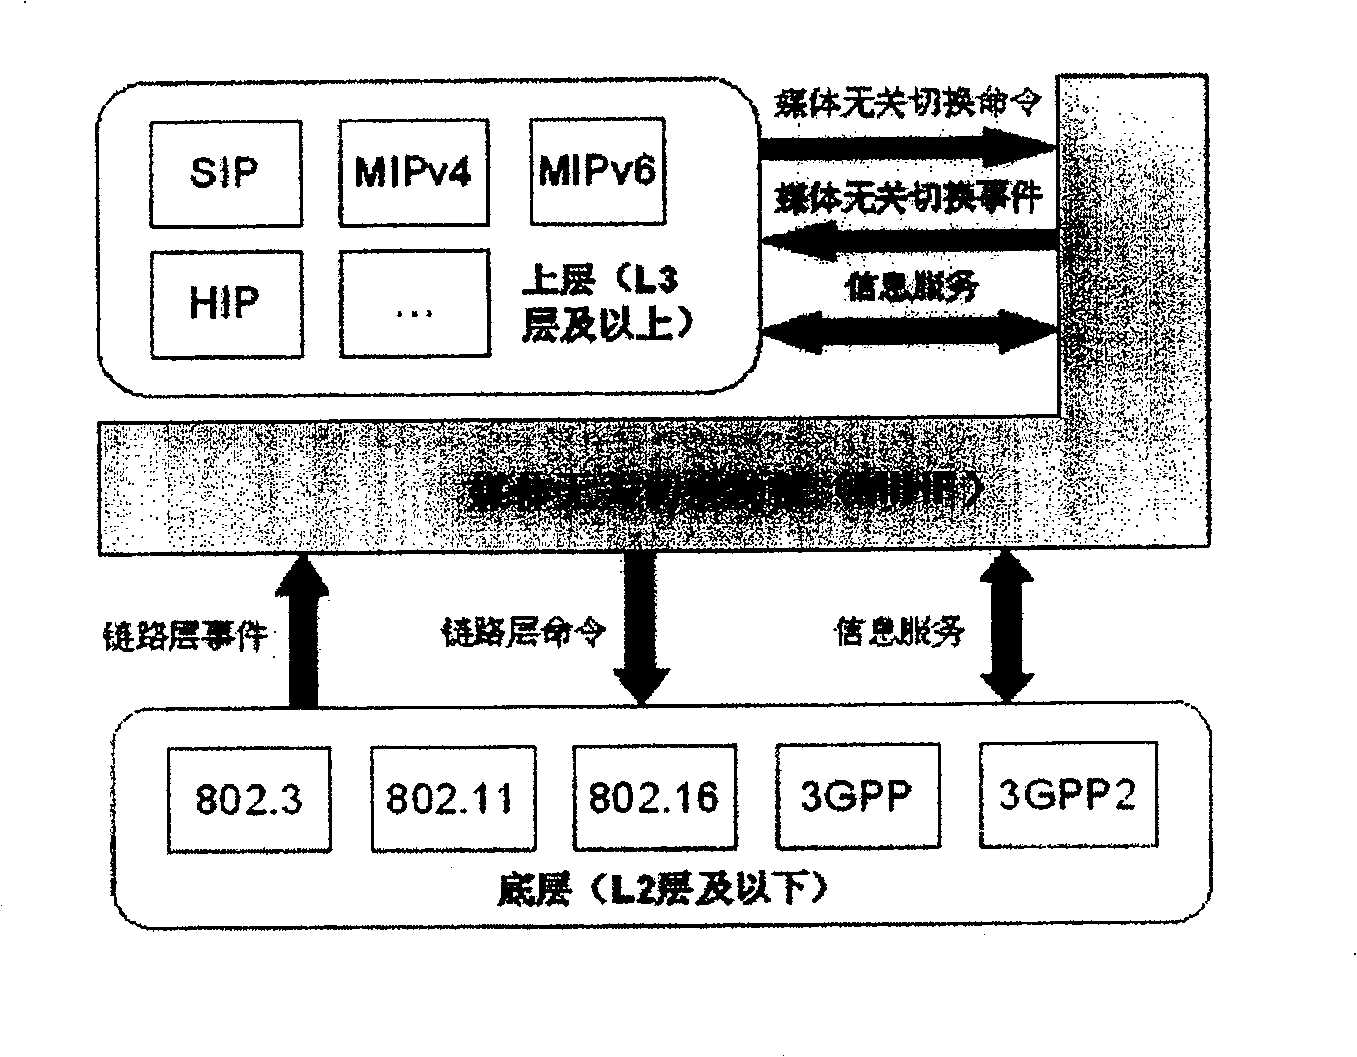 Method for obtaining supported service information by independent medium switching functional entity